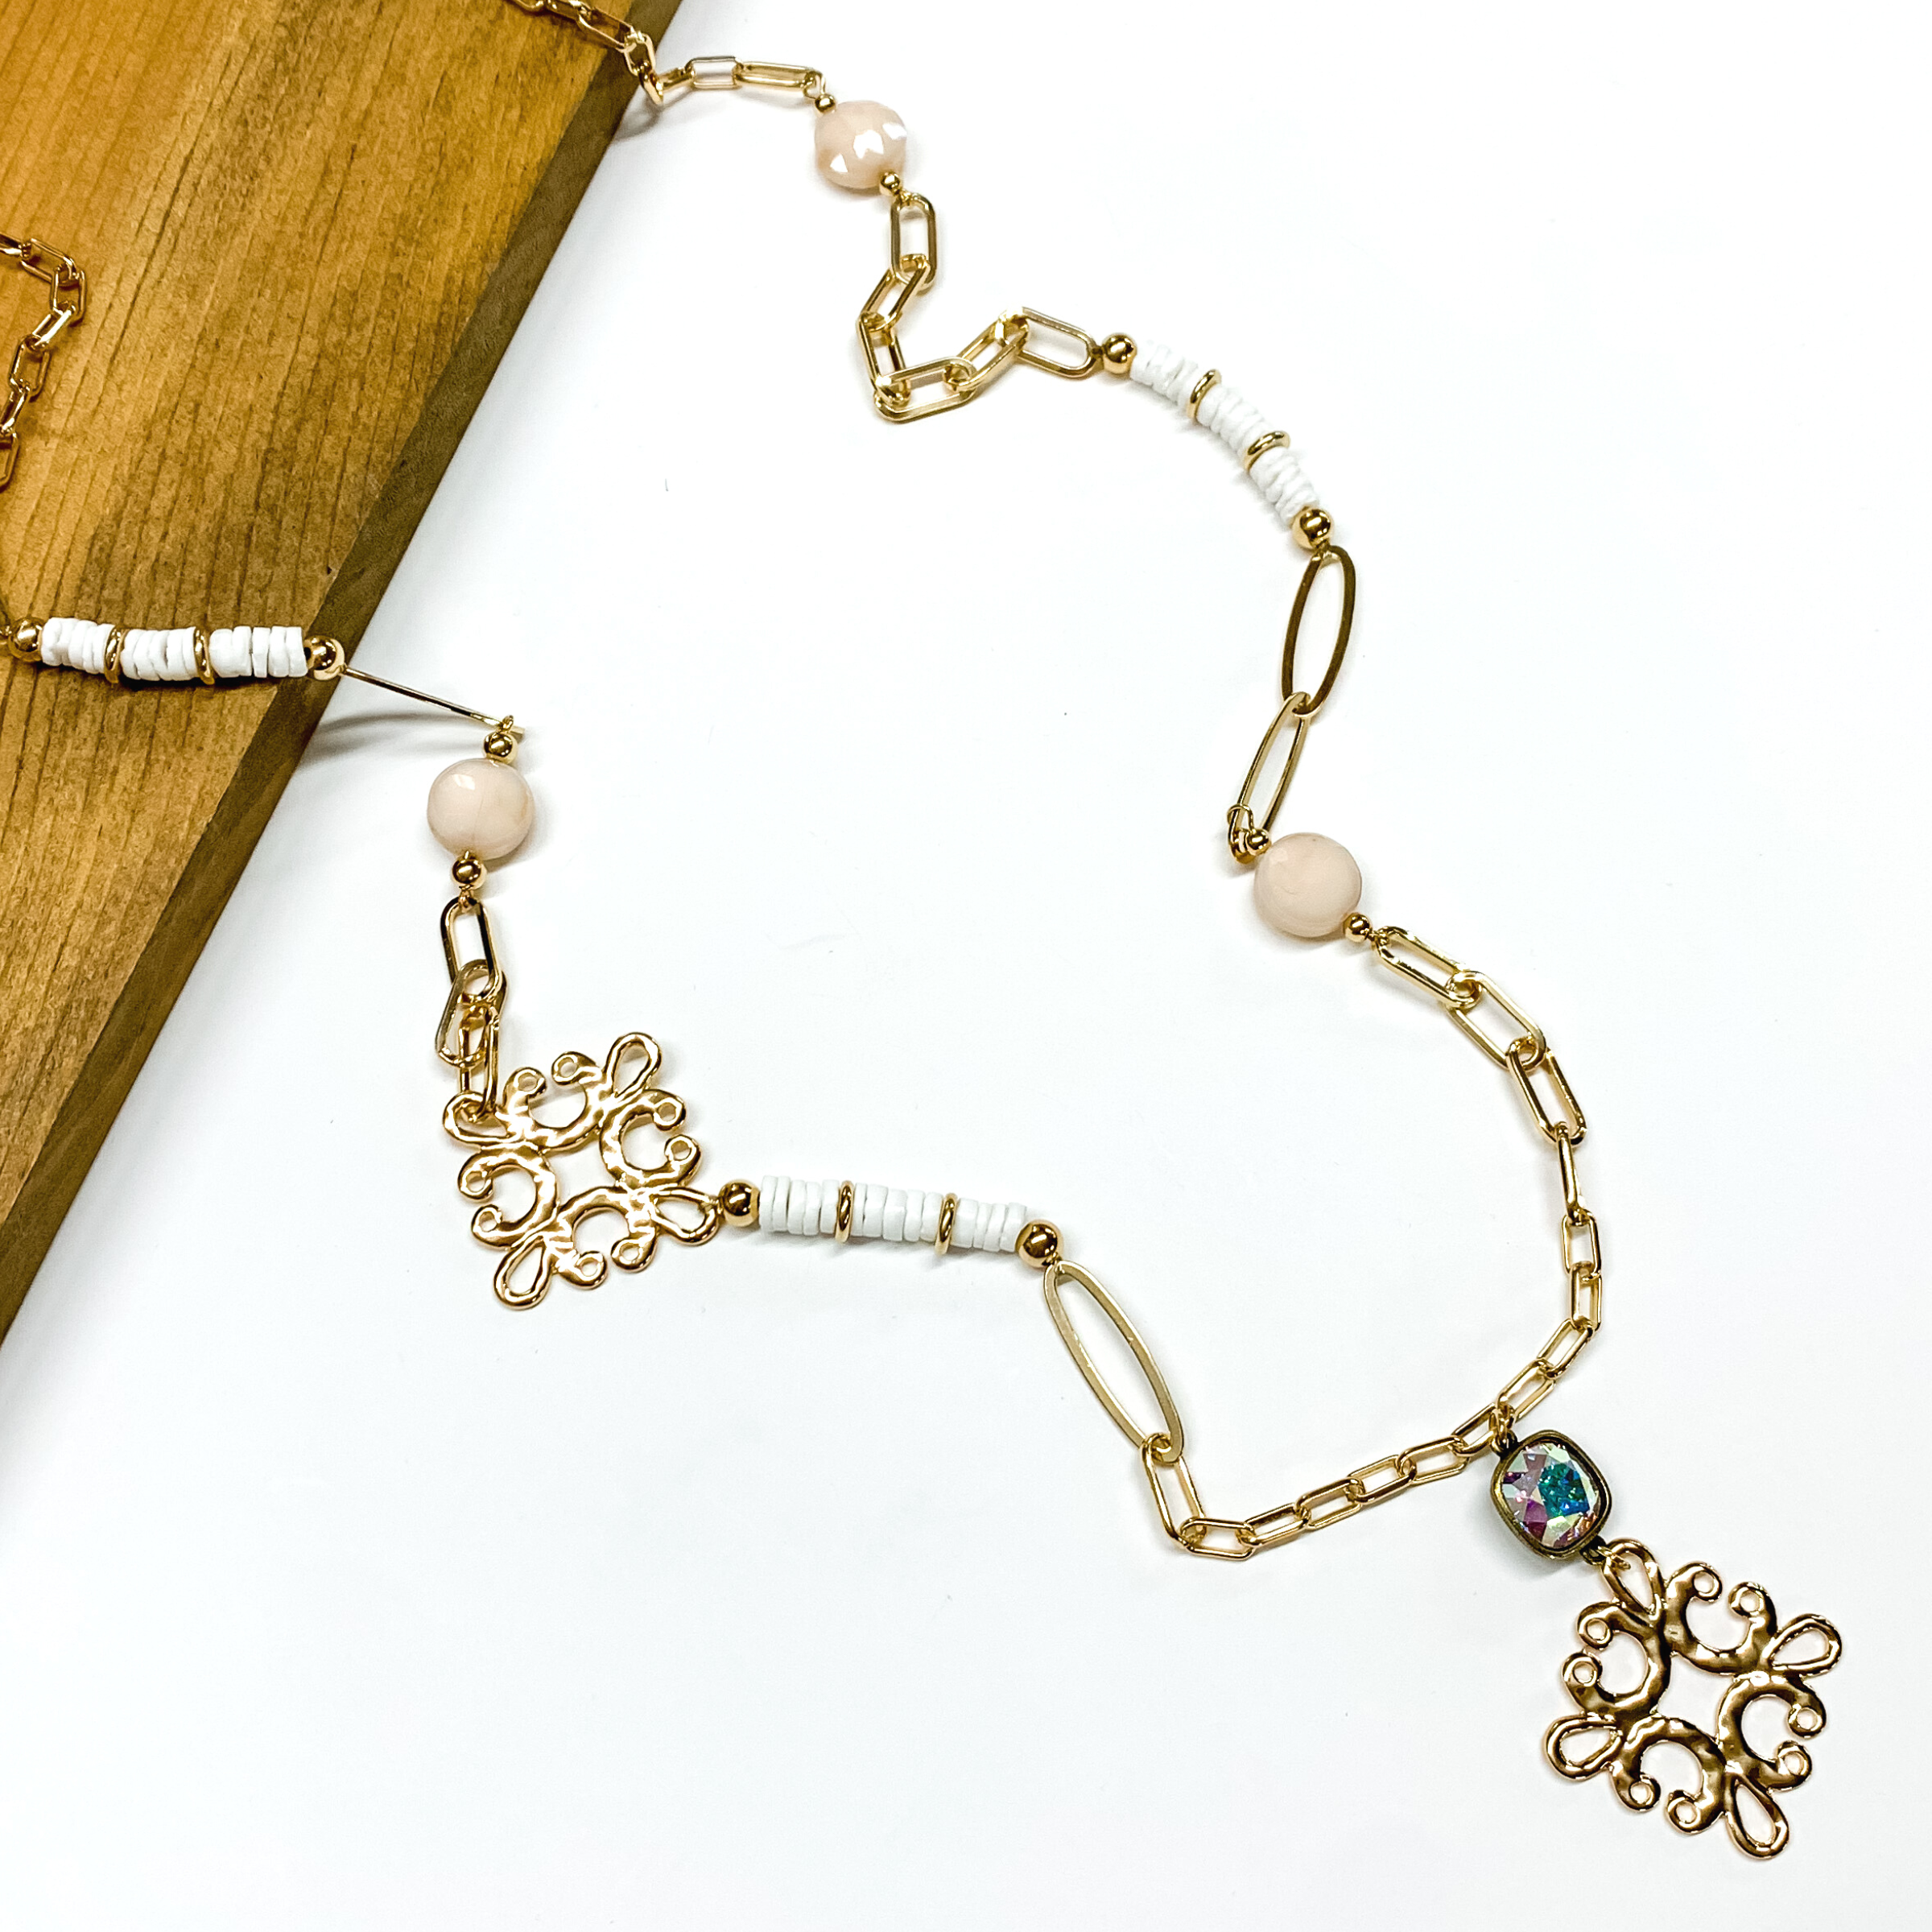 Gold paperclip chain and white beaded necklace. This necklace also includes an ab crystal and gold quatrefoil drop. This necklace is pictured partially laying on a brown block on a white background. 